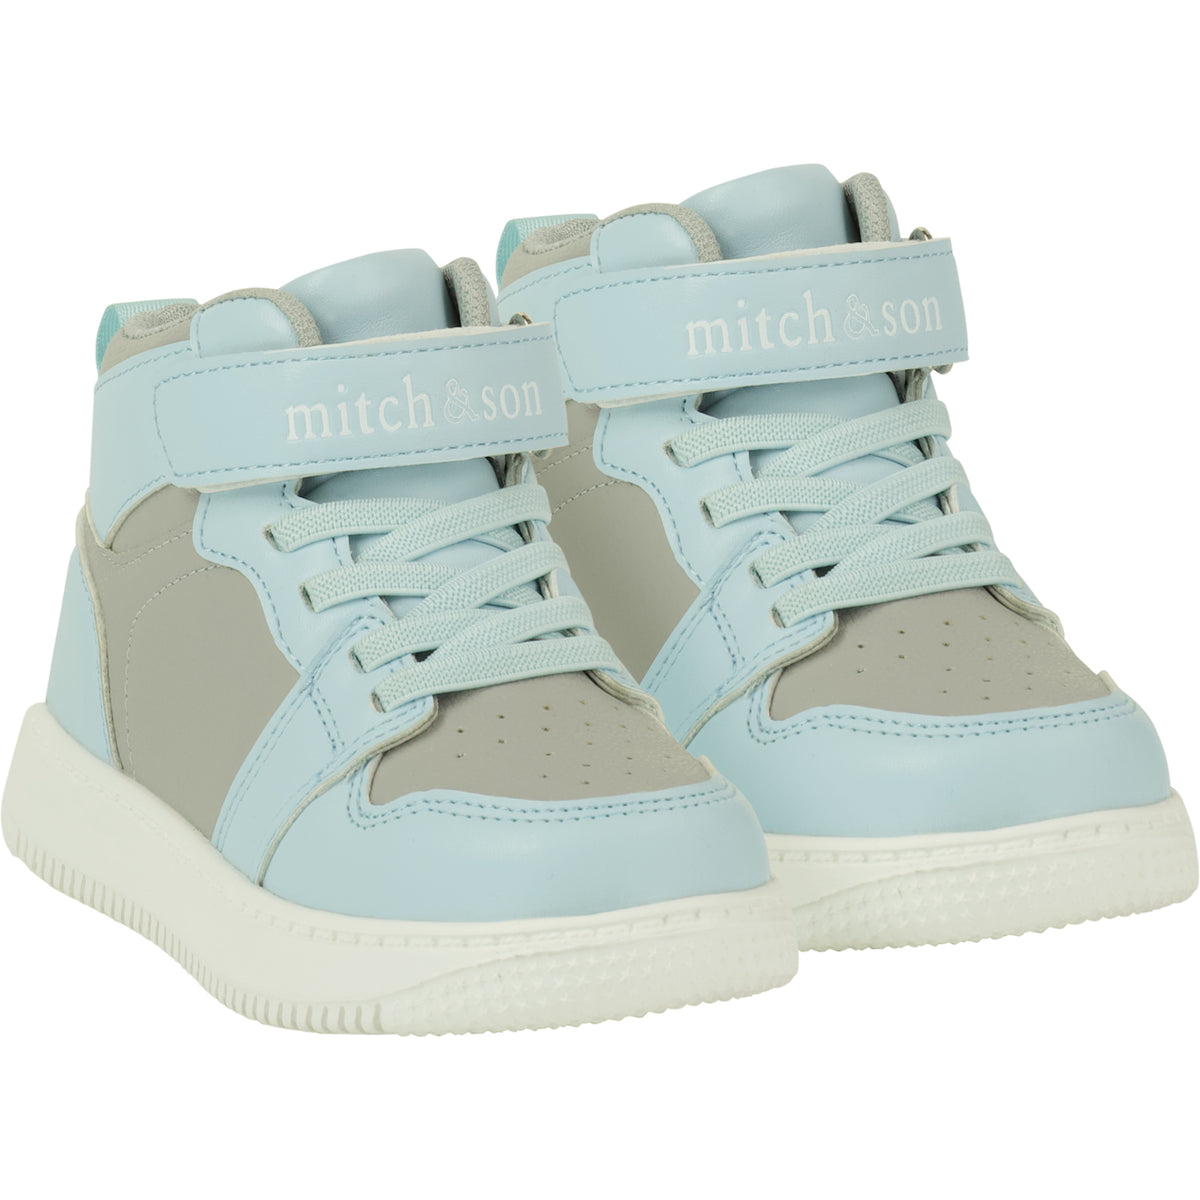 Mitch & Son Pale Blue/Grey 'Jump' High Top Trainers